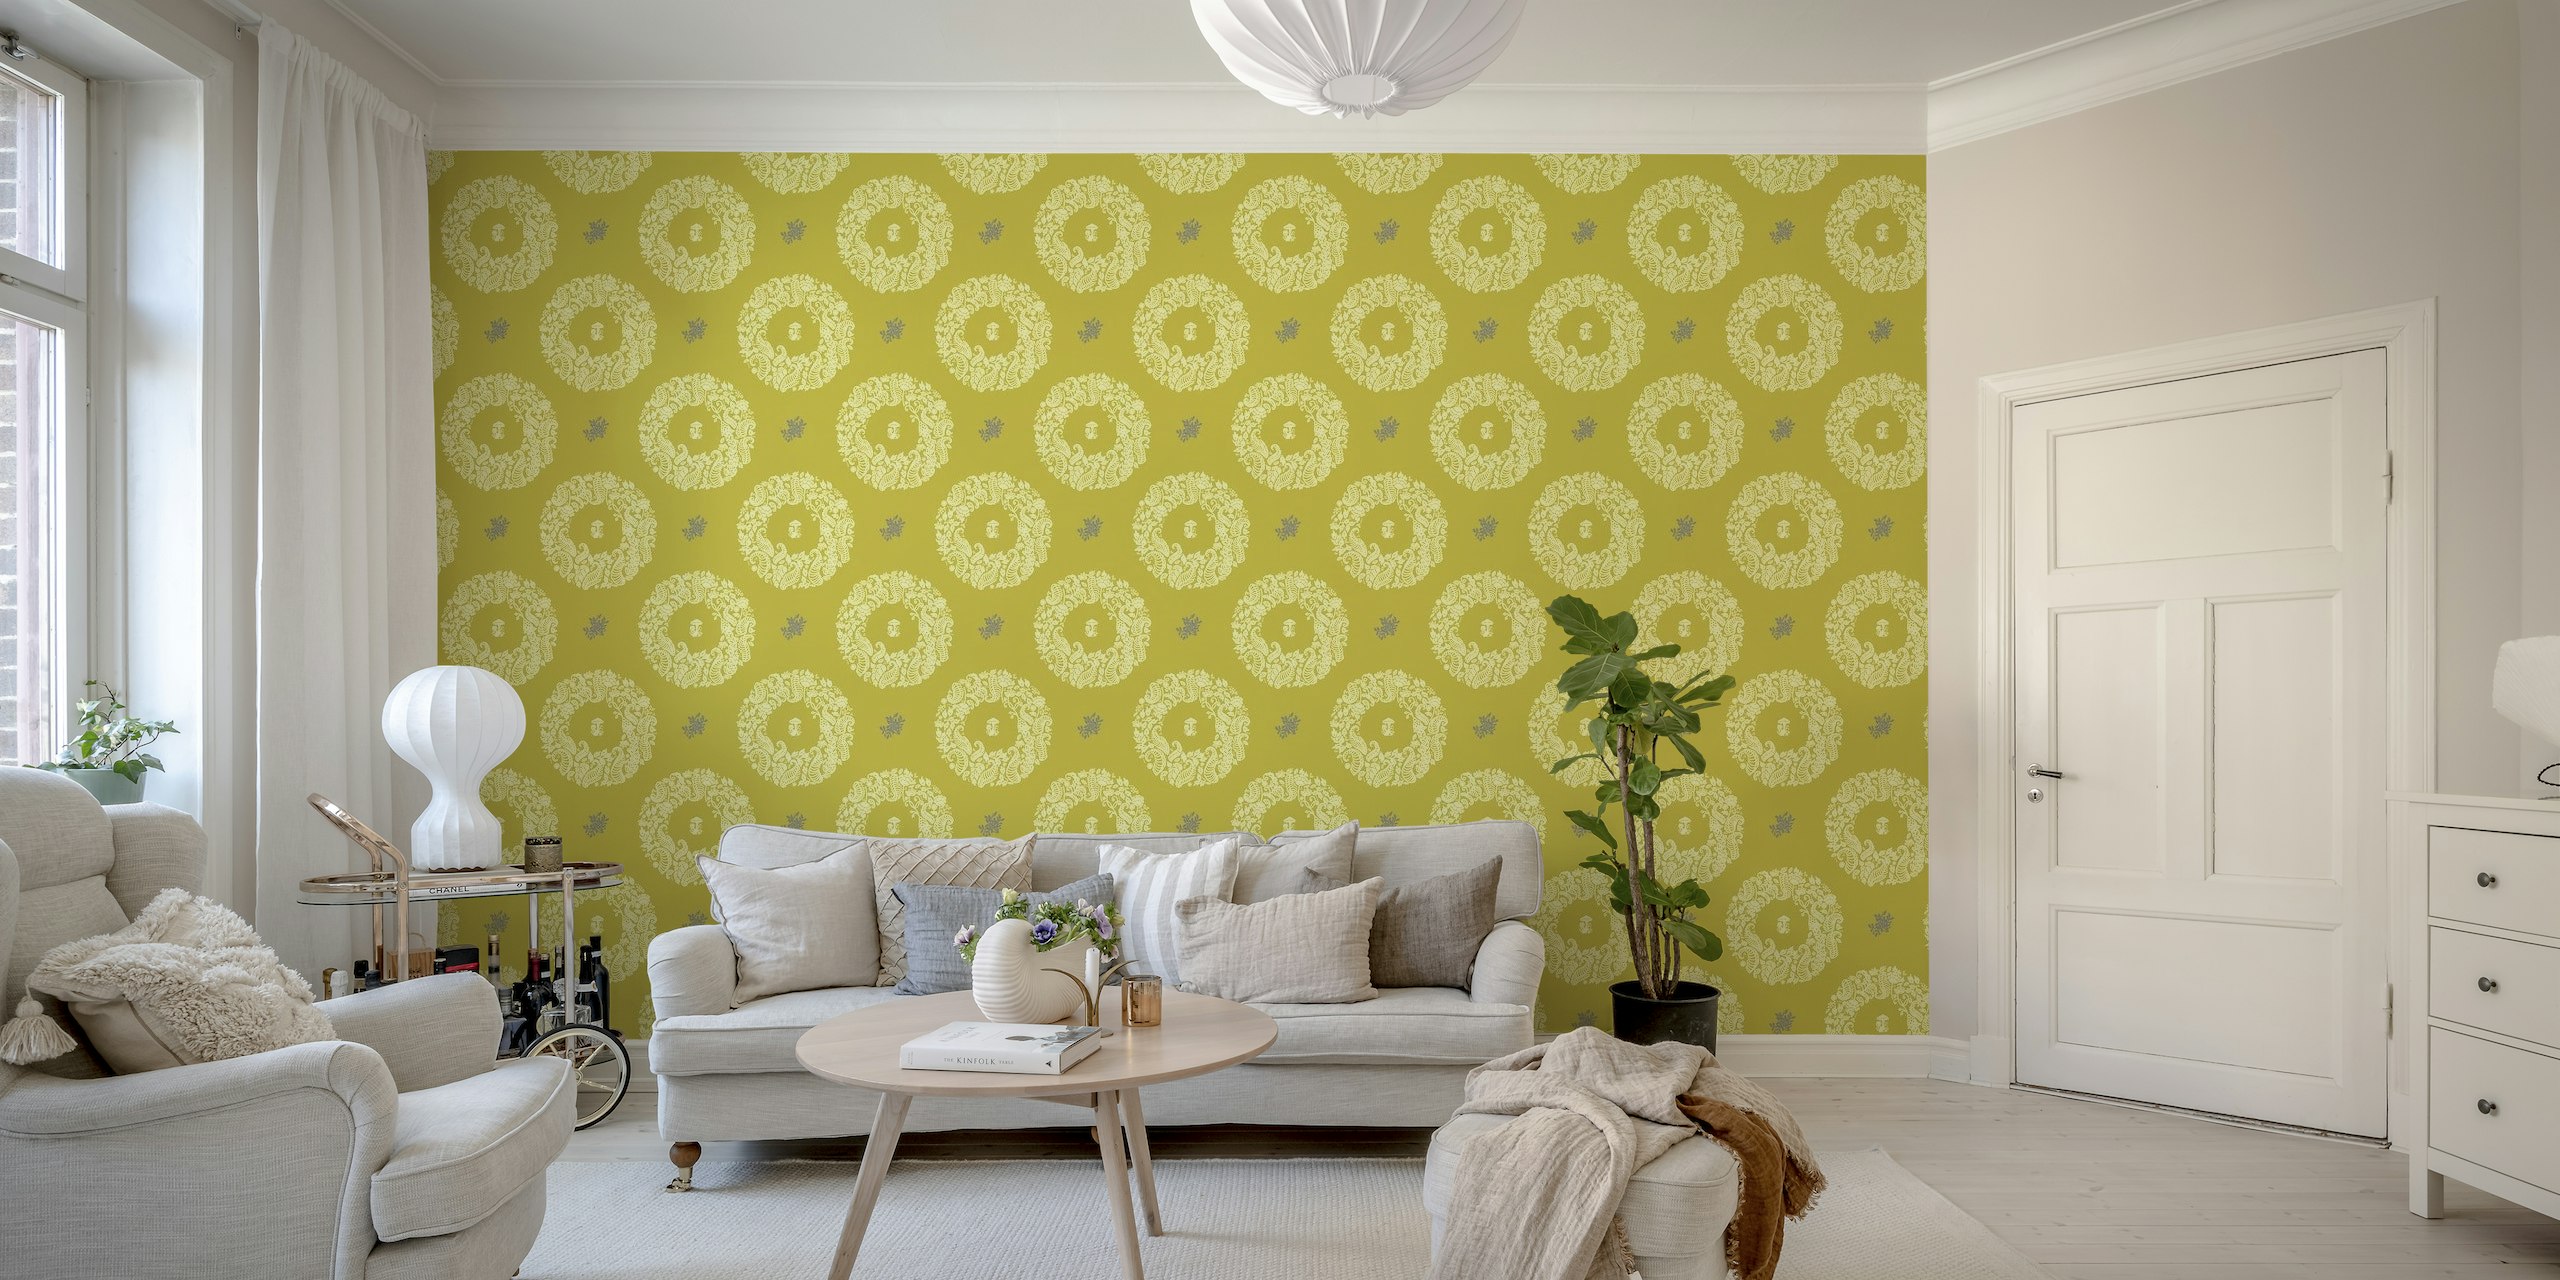 Scandi wreath wall mural on yellow background with white botanical patterns